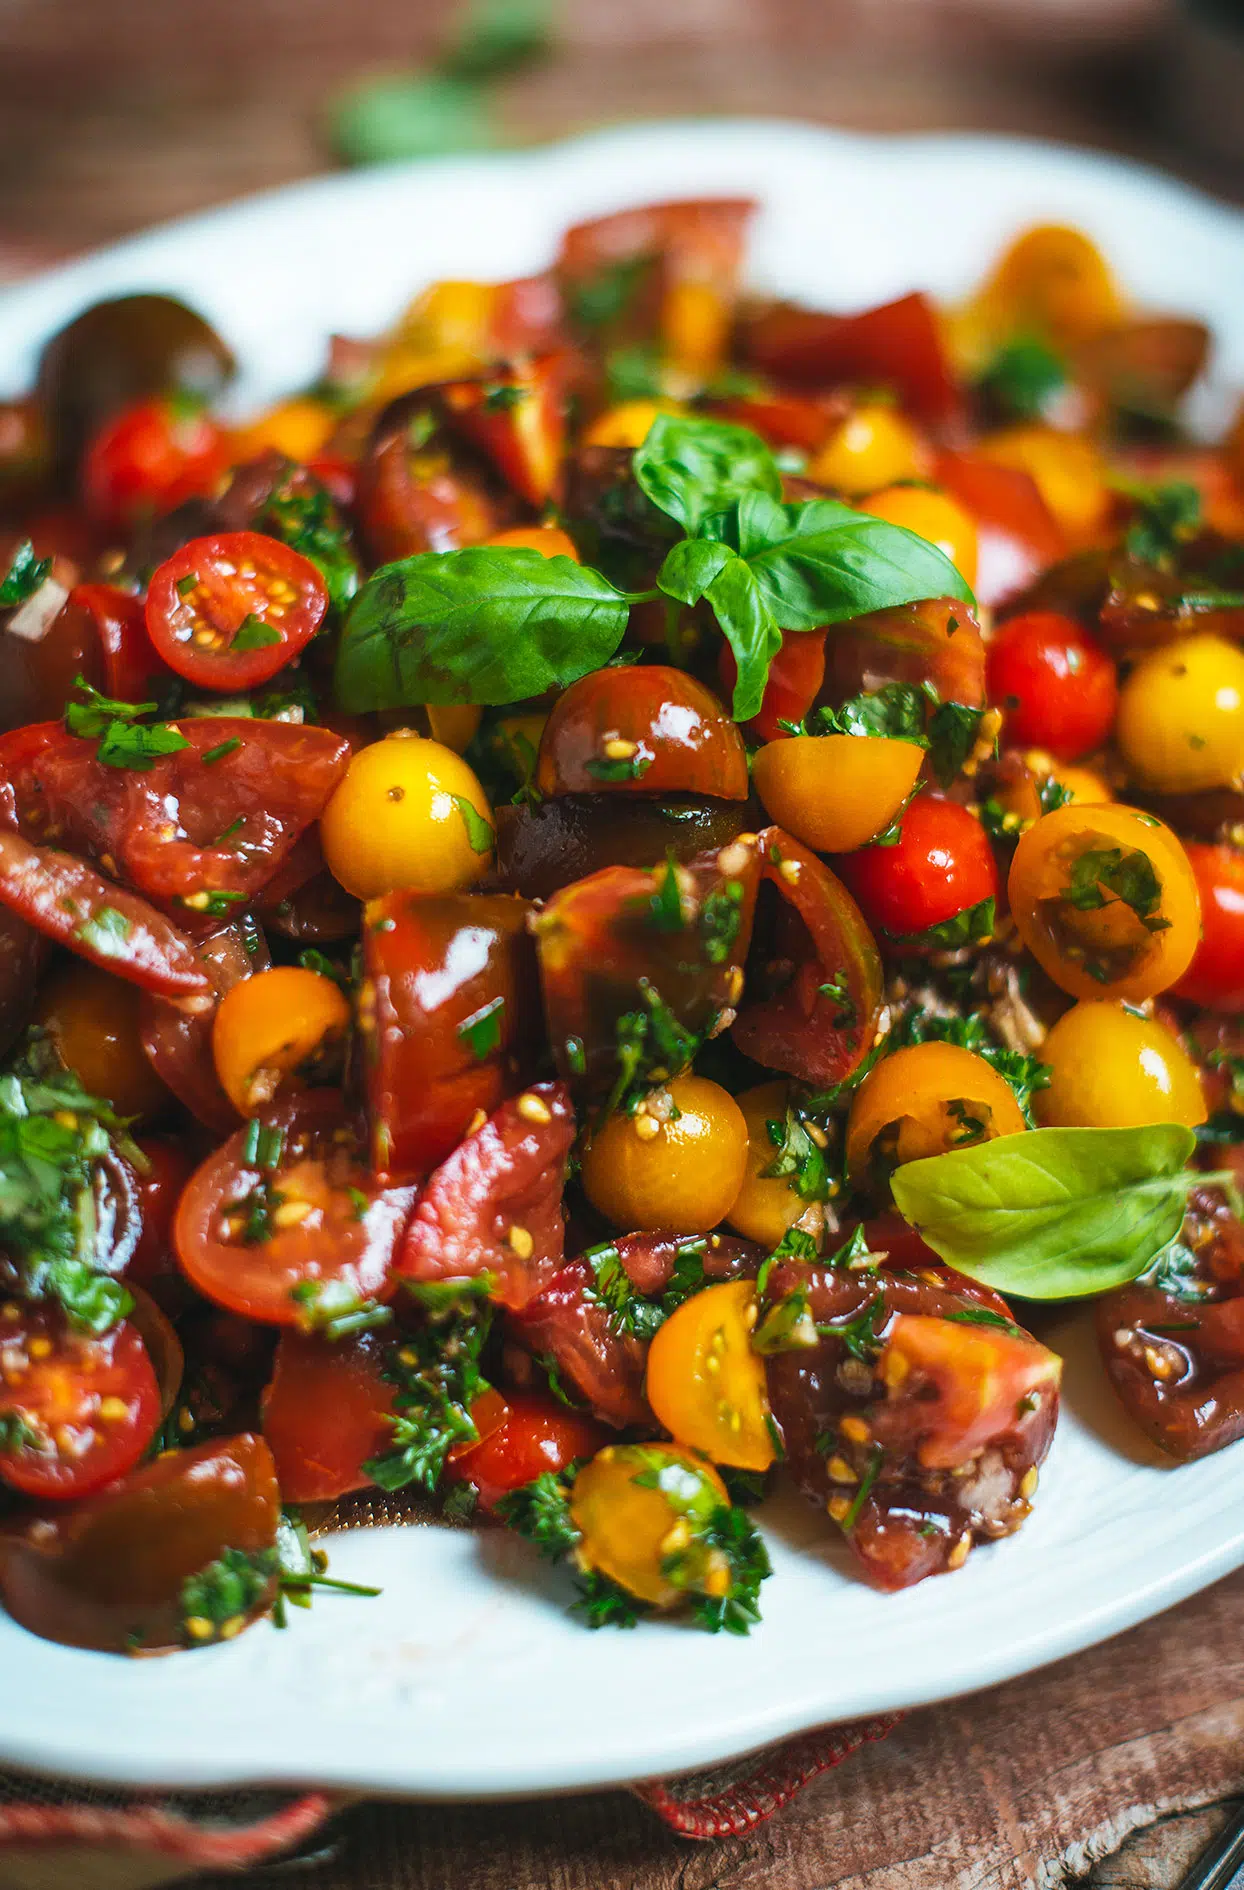 Tomato salad with a ton of fresh herbs